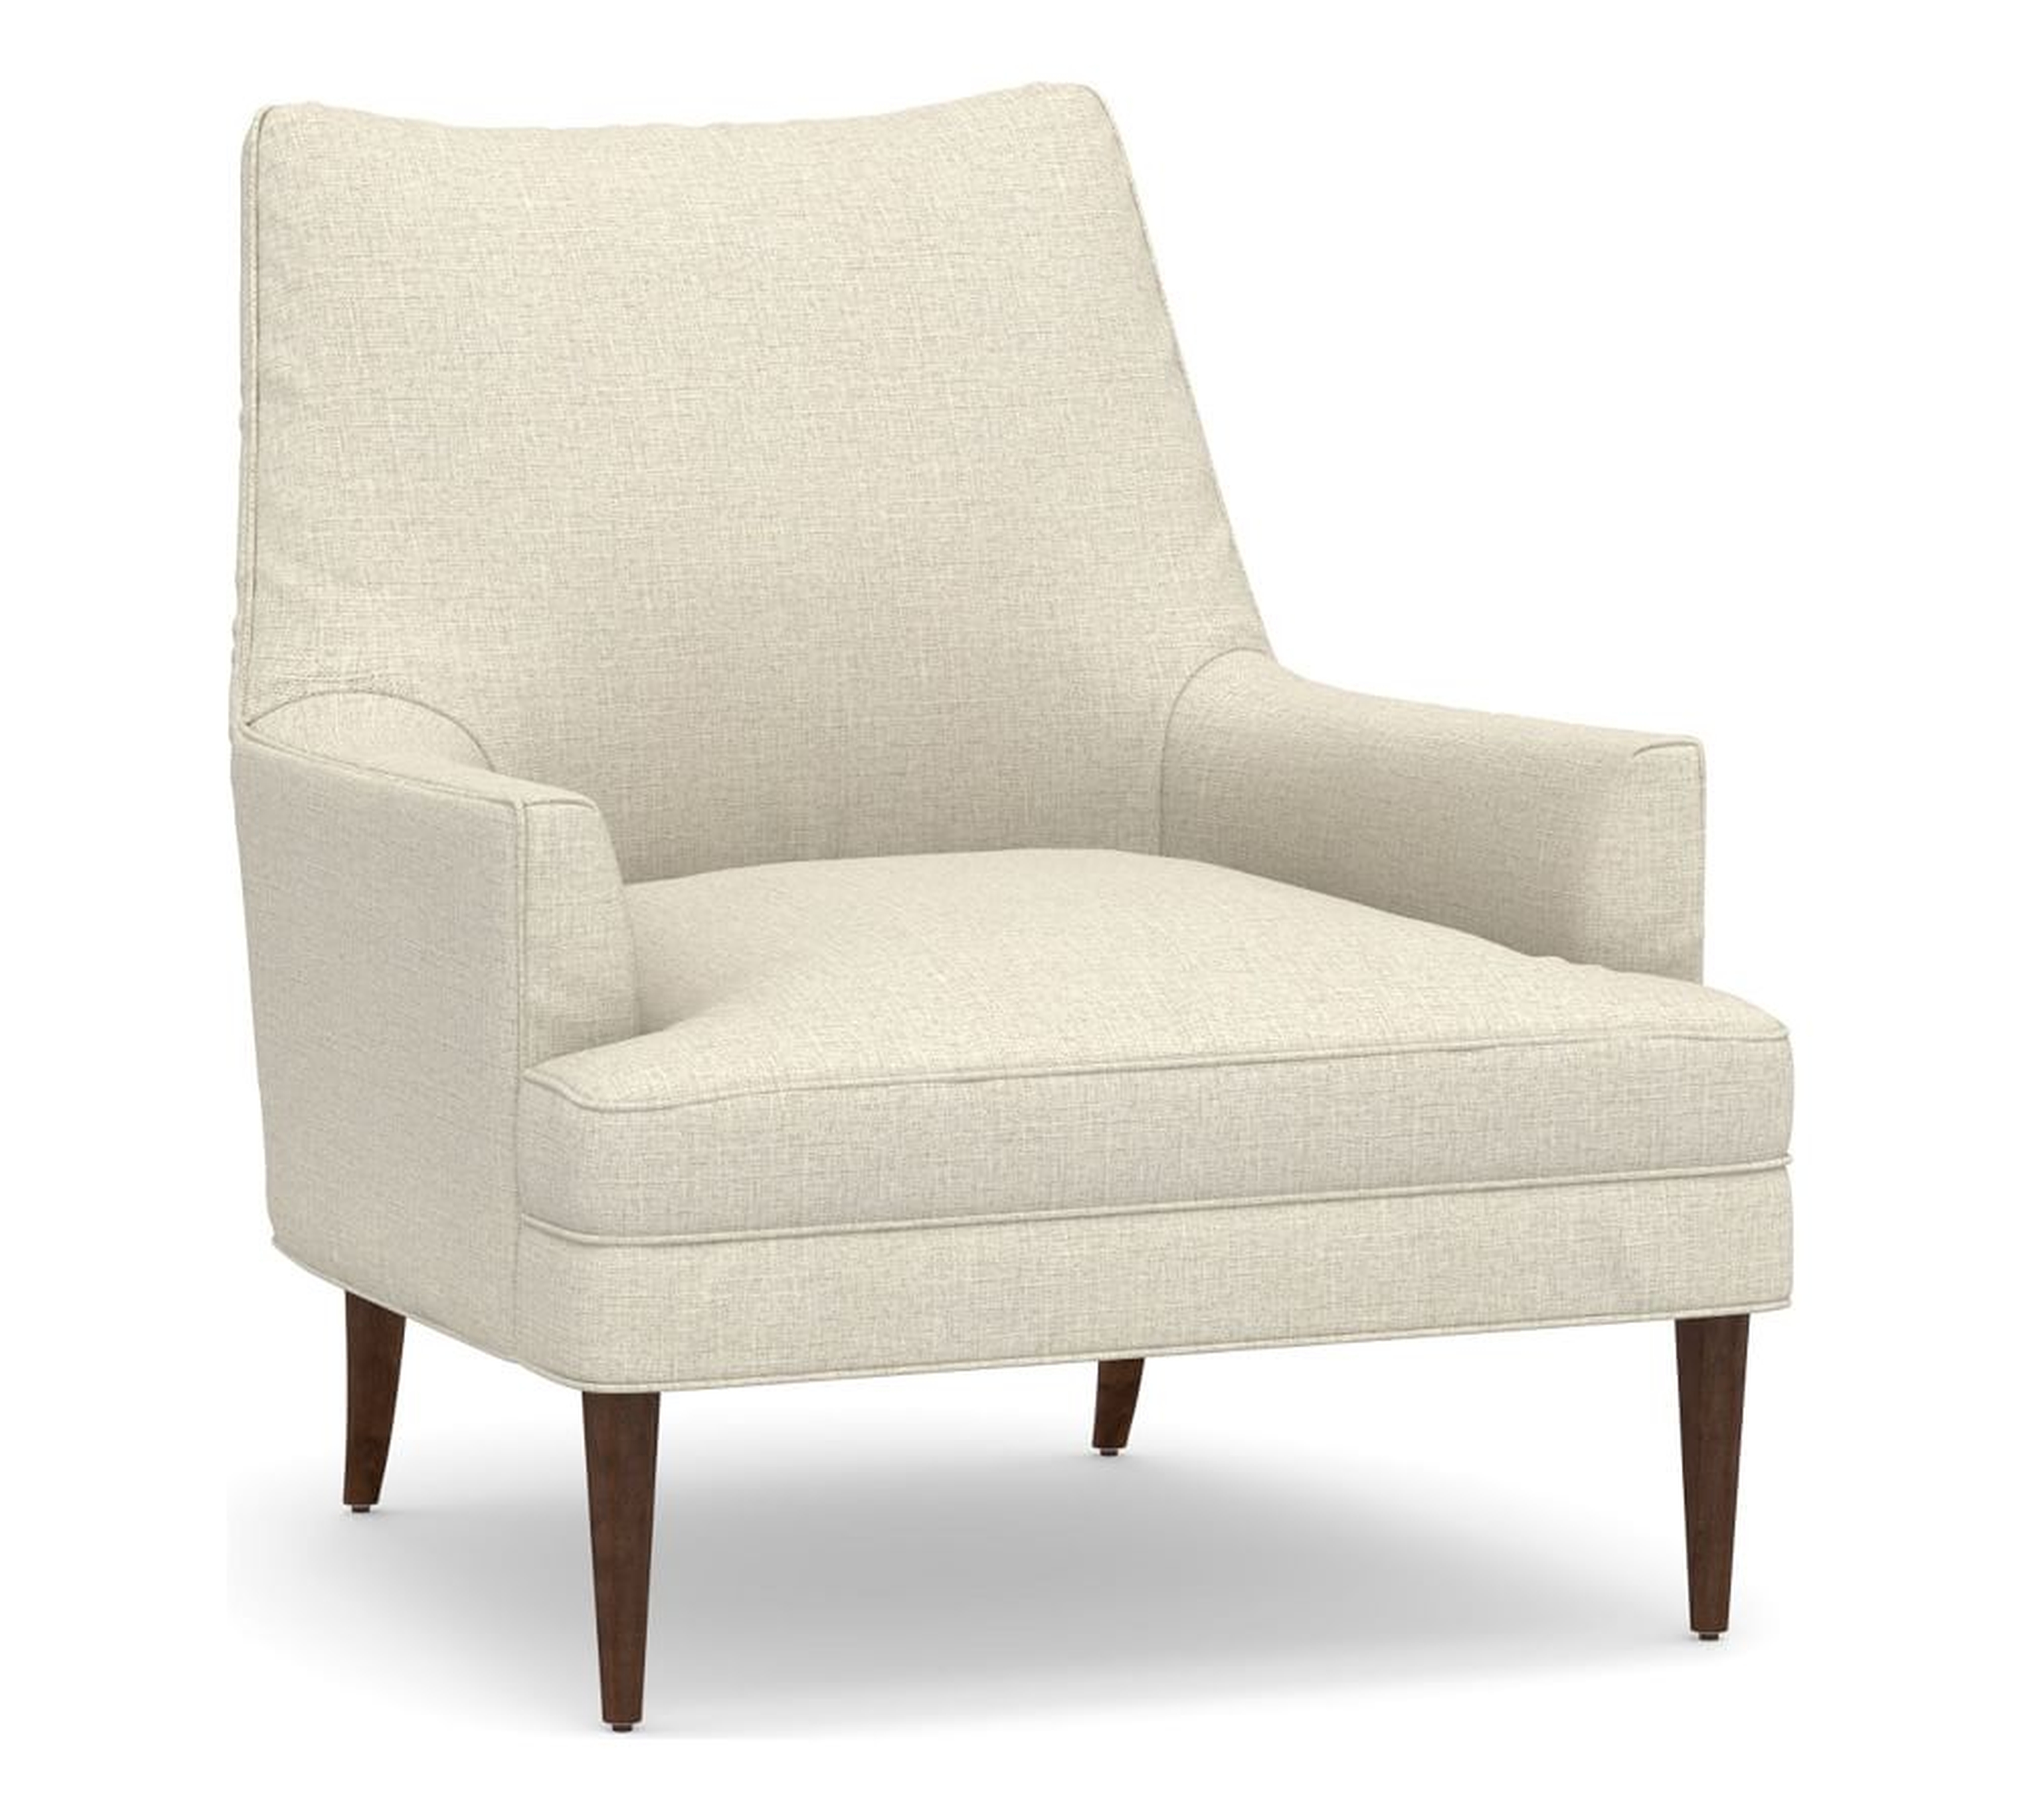 Reyes Upholstered Armchair, Polyester Wrapped Cushions, Basketweave Slub, Oatmeal - Pottery Barn